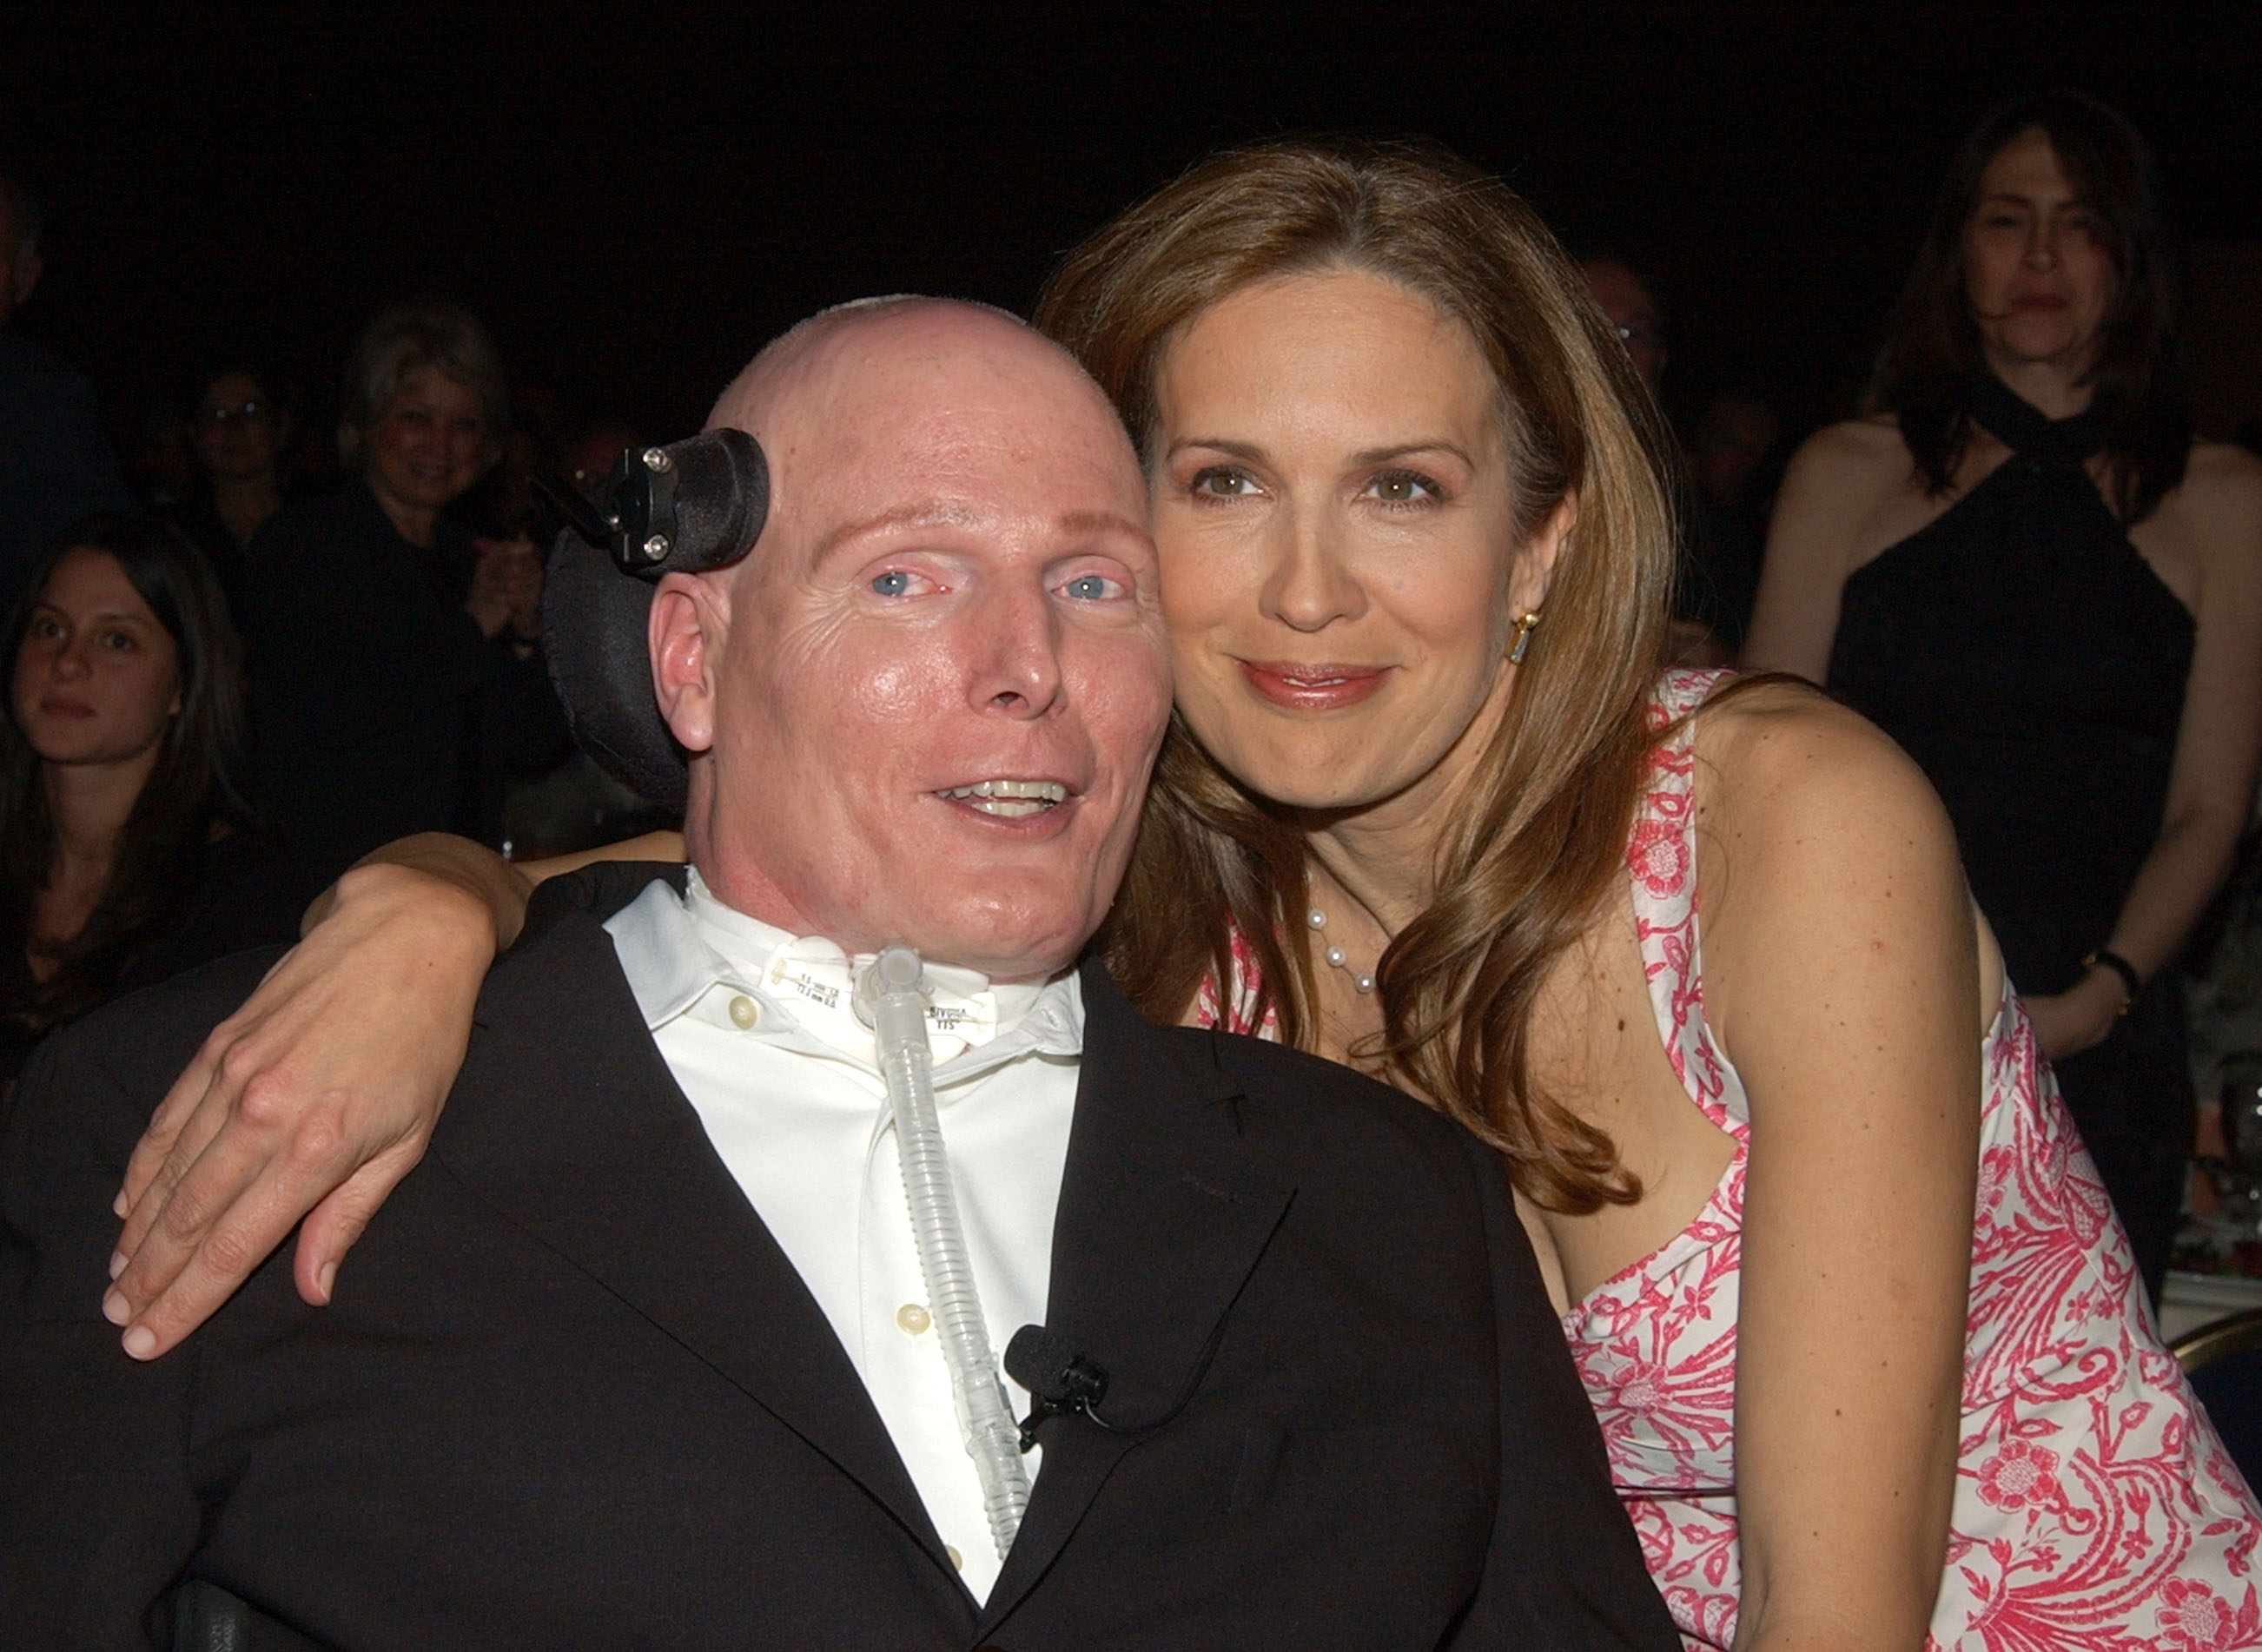 Christopher Reeve and Dana Reeve during AAFA American Image Awards To Benefit the Christopher Reeve Paralysis Foundation at Grand Hyatt Hotel in New York City, New York | Source: Getty Images